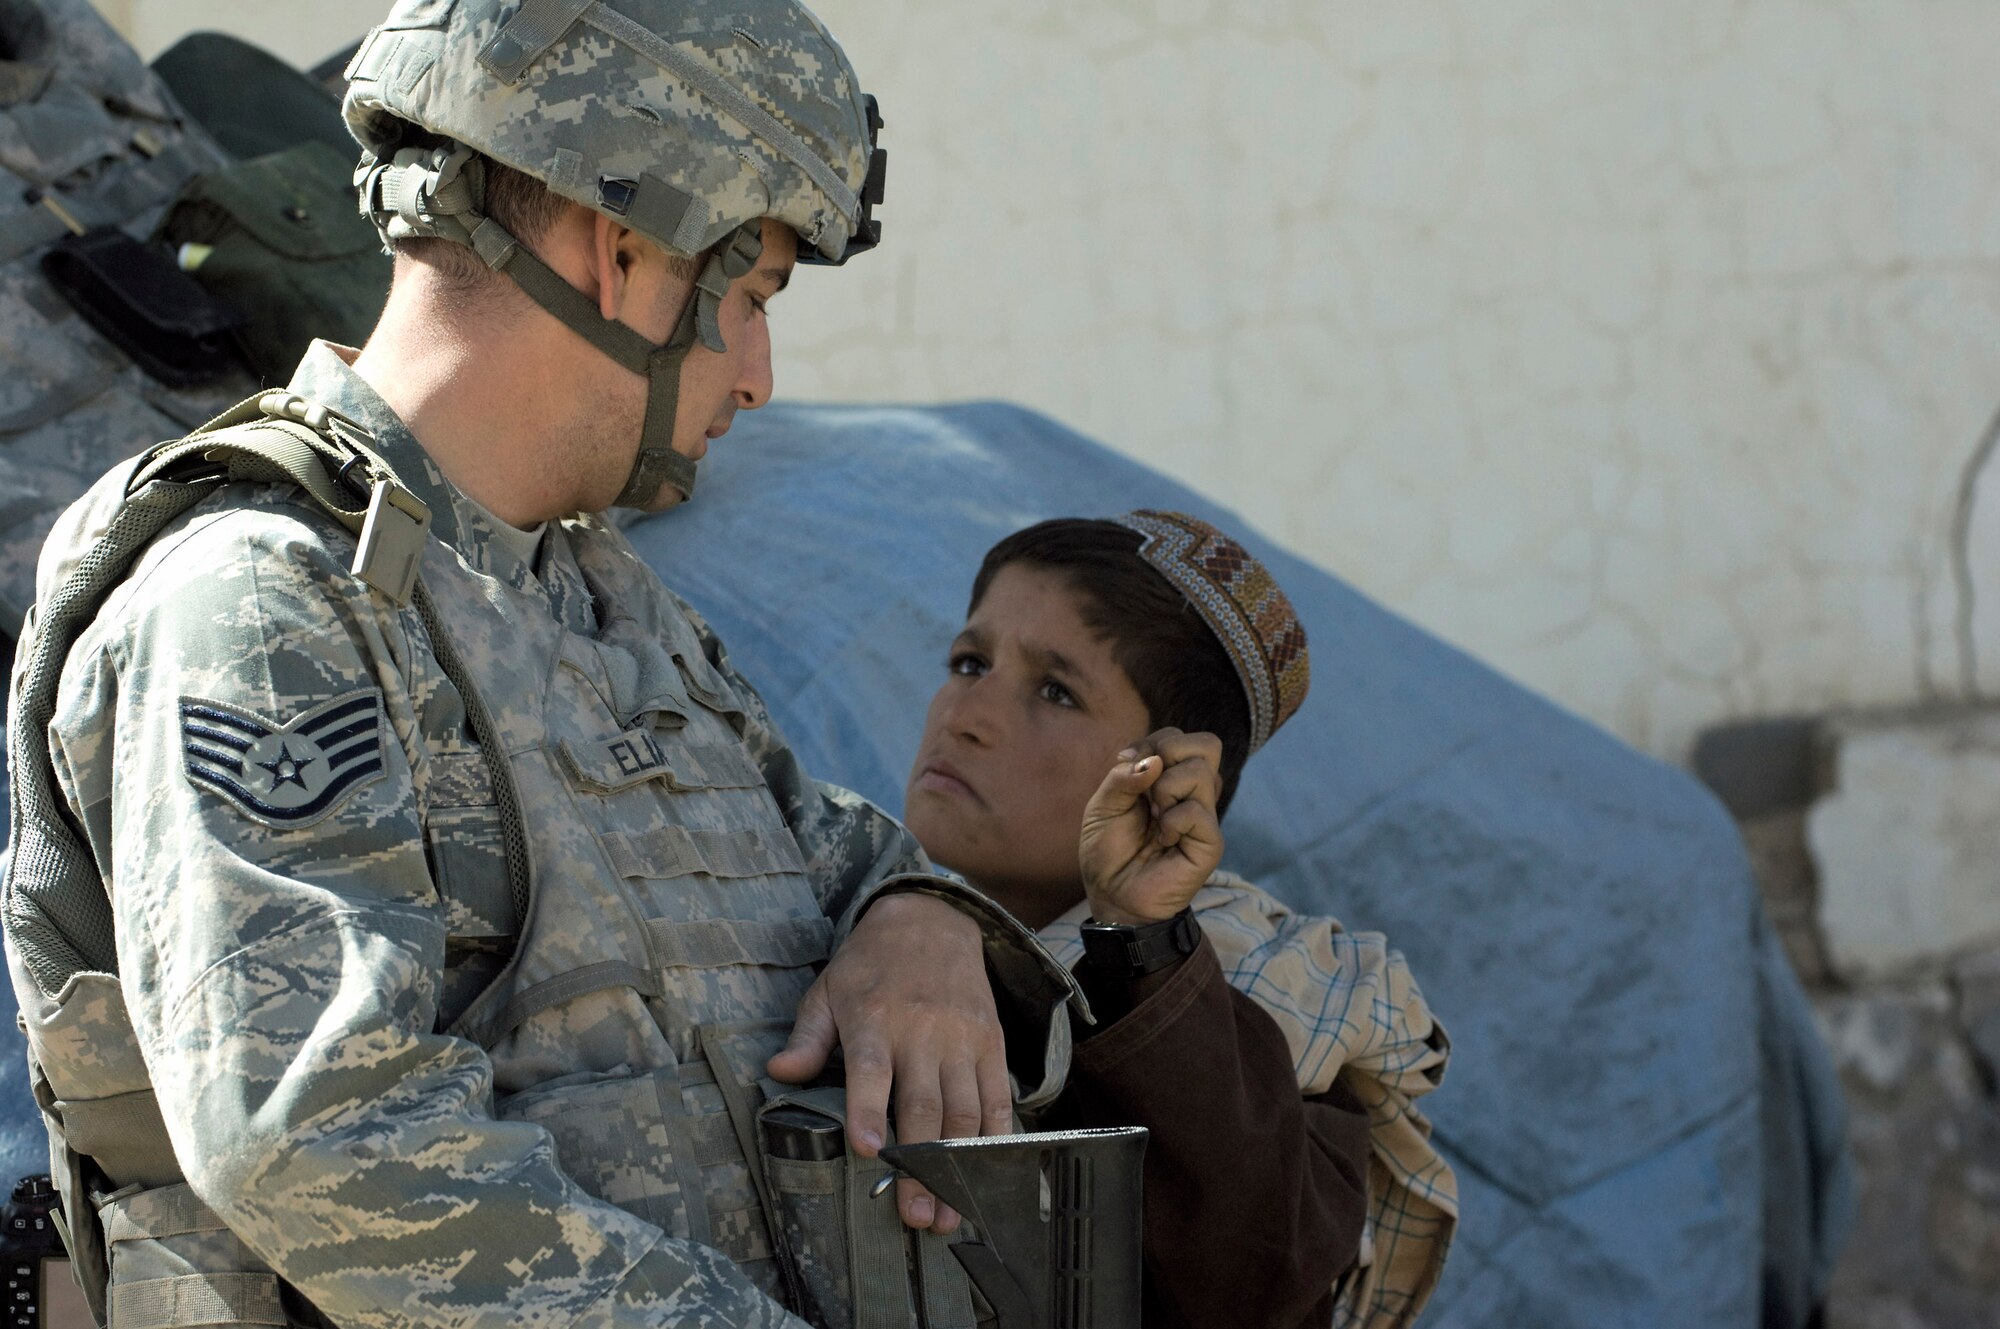 Staff Sgt. Don Elias talks with an Afghan boy while providing security at a veterinary outreach held by the Zabul Provincial Reconstruction Team Oct. 17 in Qalat, Afghanistan. The PRT provided free treatment to the nomadic Kuchi tribe's livestock. Sergeant Elias is deployed to the PRT as the force protection NCO in charge from Wright-Patterson Air Force Base, Ohio. He is a native of Buffalo, N.Y. (U.S. Air Force photo/Master Sgt. Keith Brown) 
